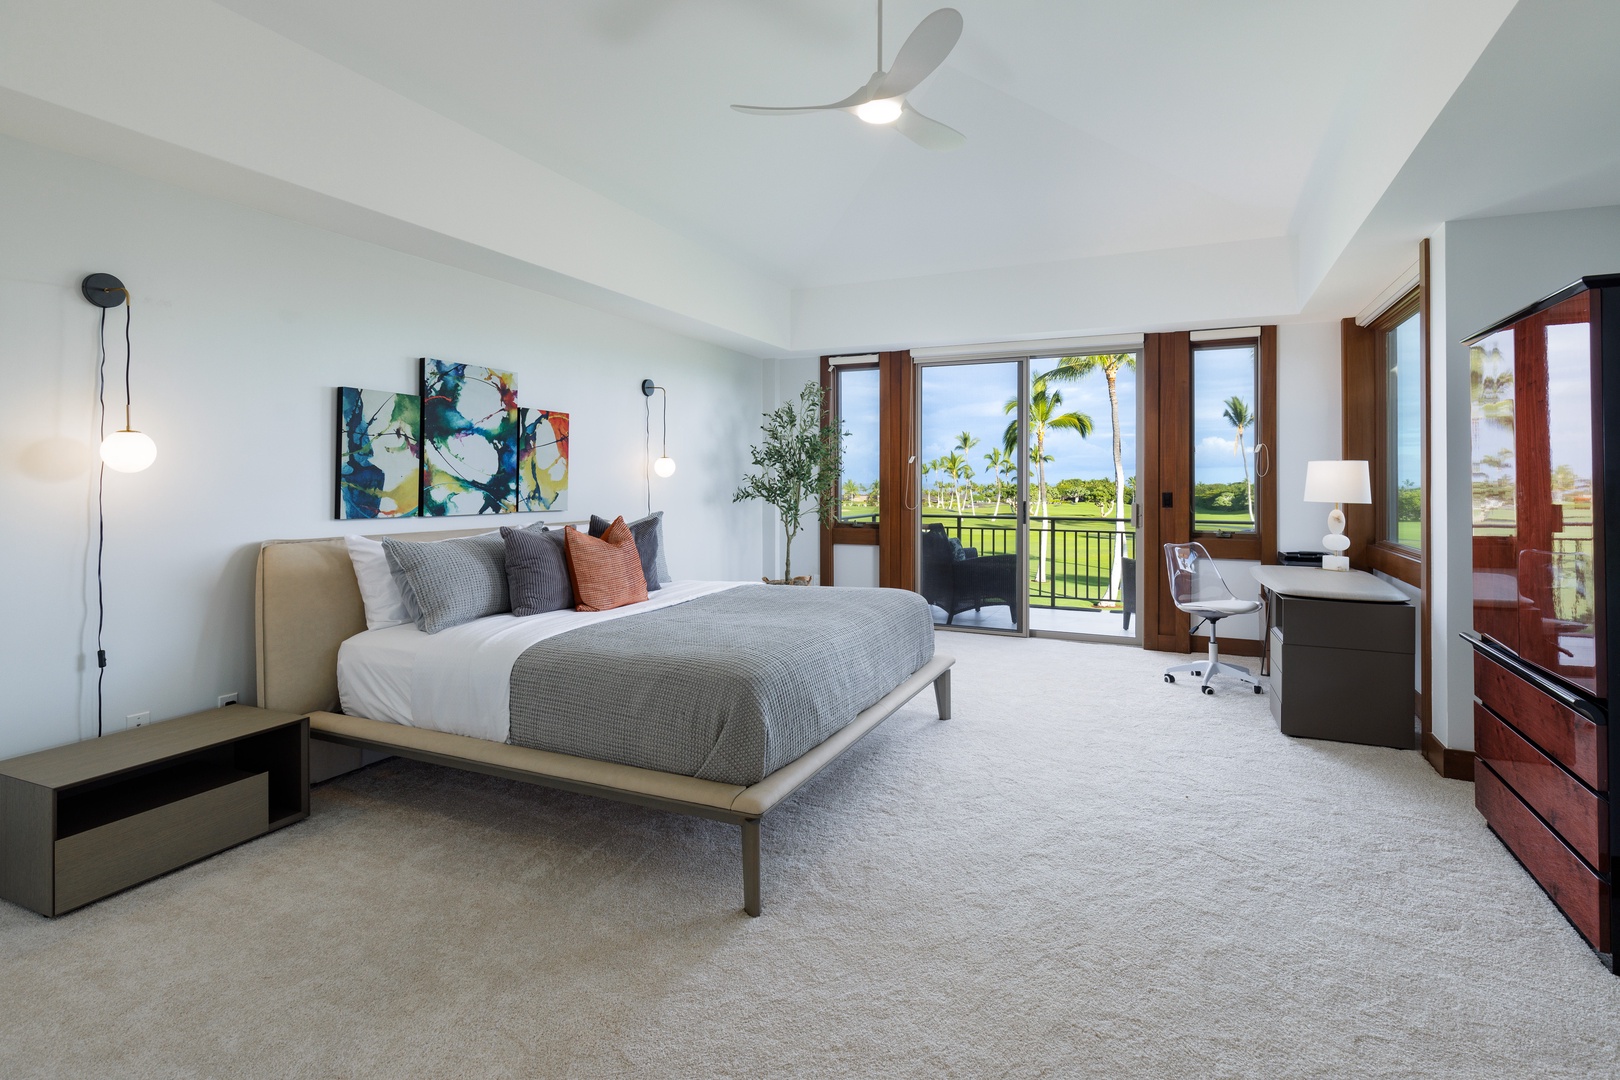 Kailua Kona Vacation Rentals, Fairway Villa 104A - Wake up to the sound of gentle breeze every morning while enjoying your morning coffee on the private lanai.